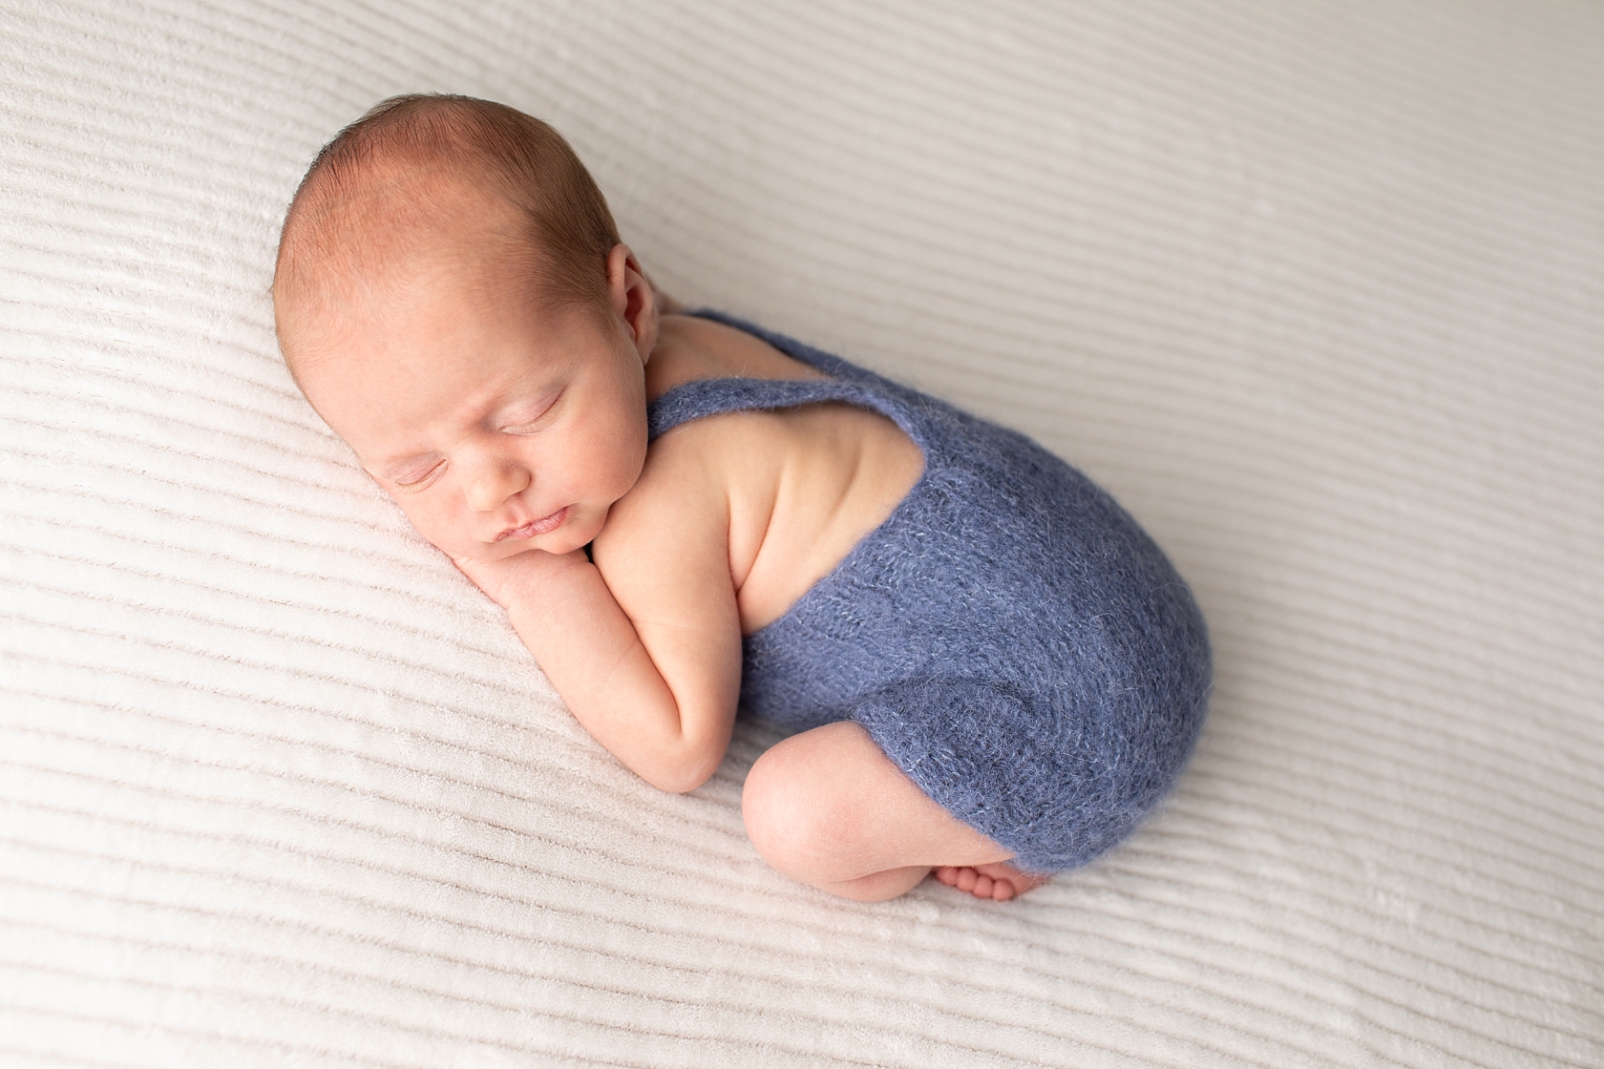 How to choose and download your digital images of a baby in blue overalls on his tummy
